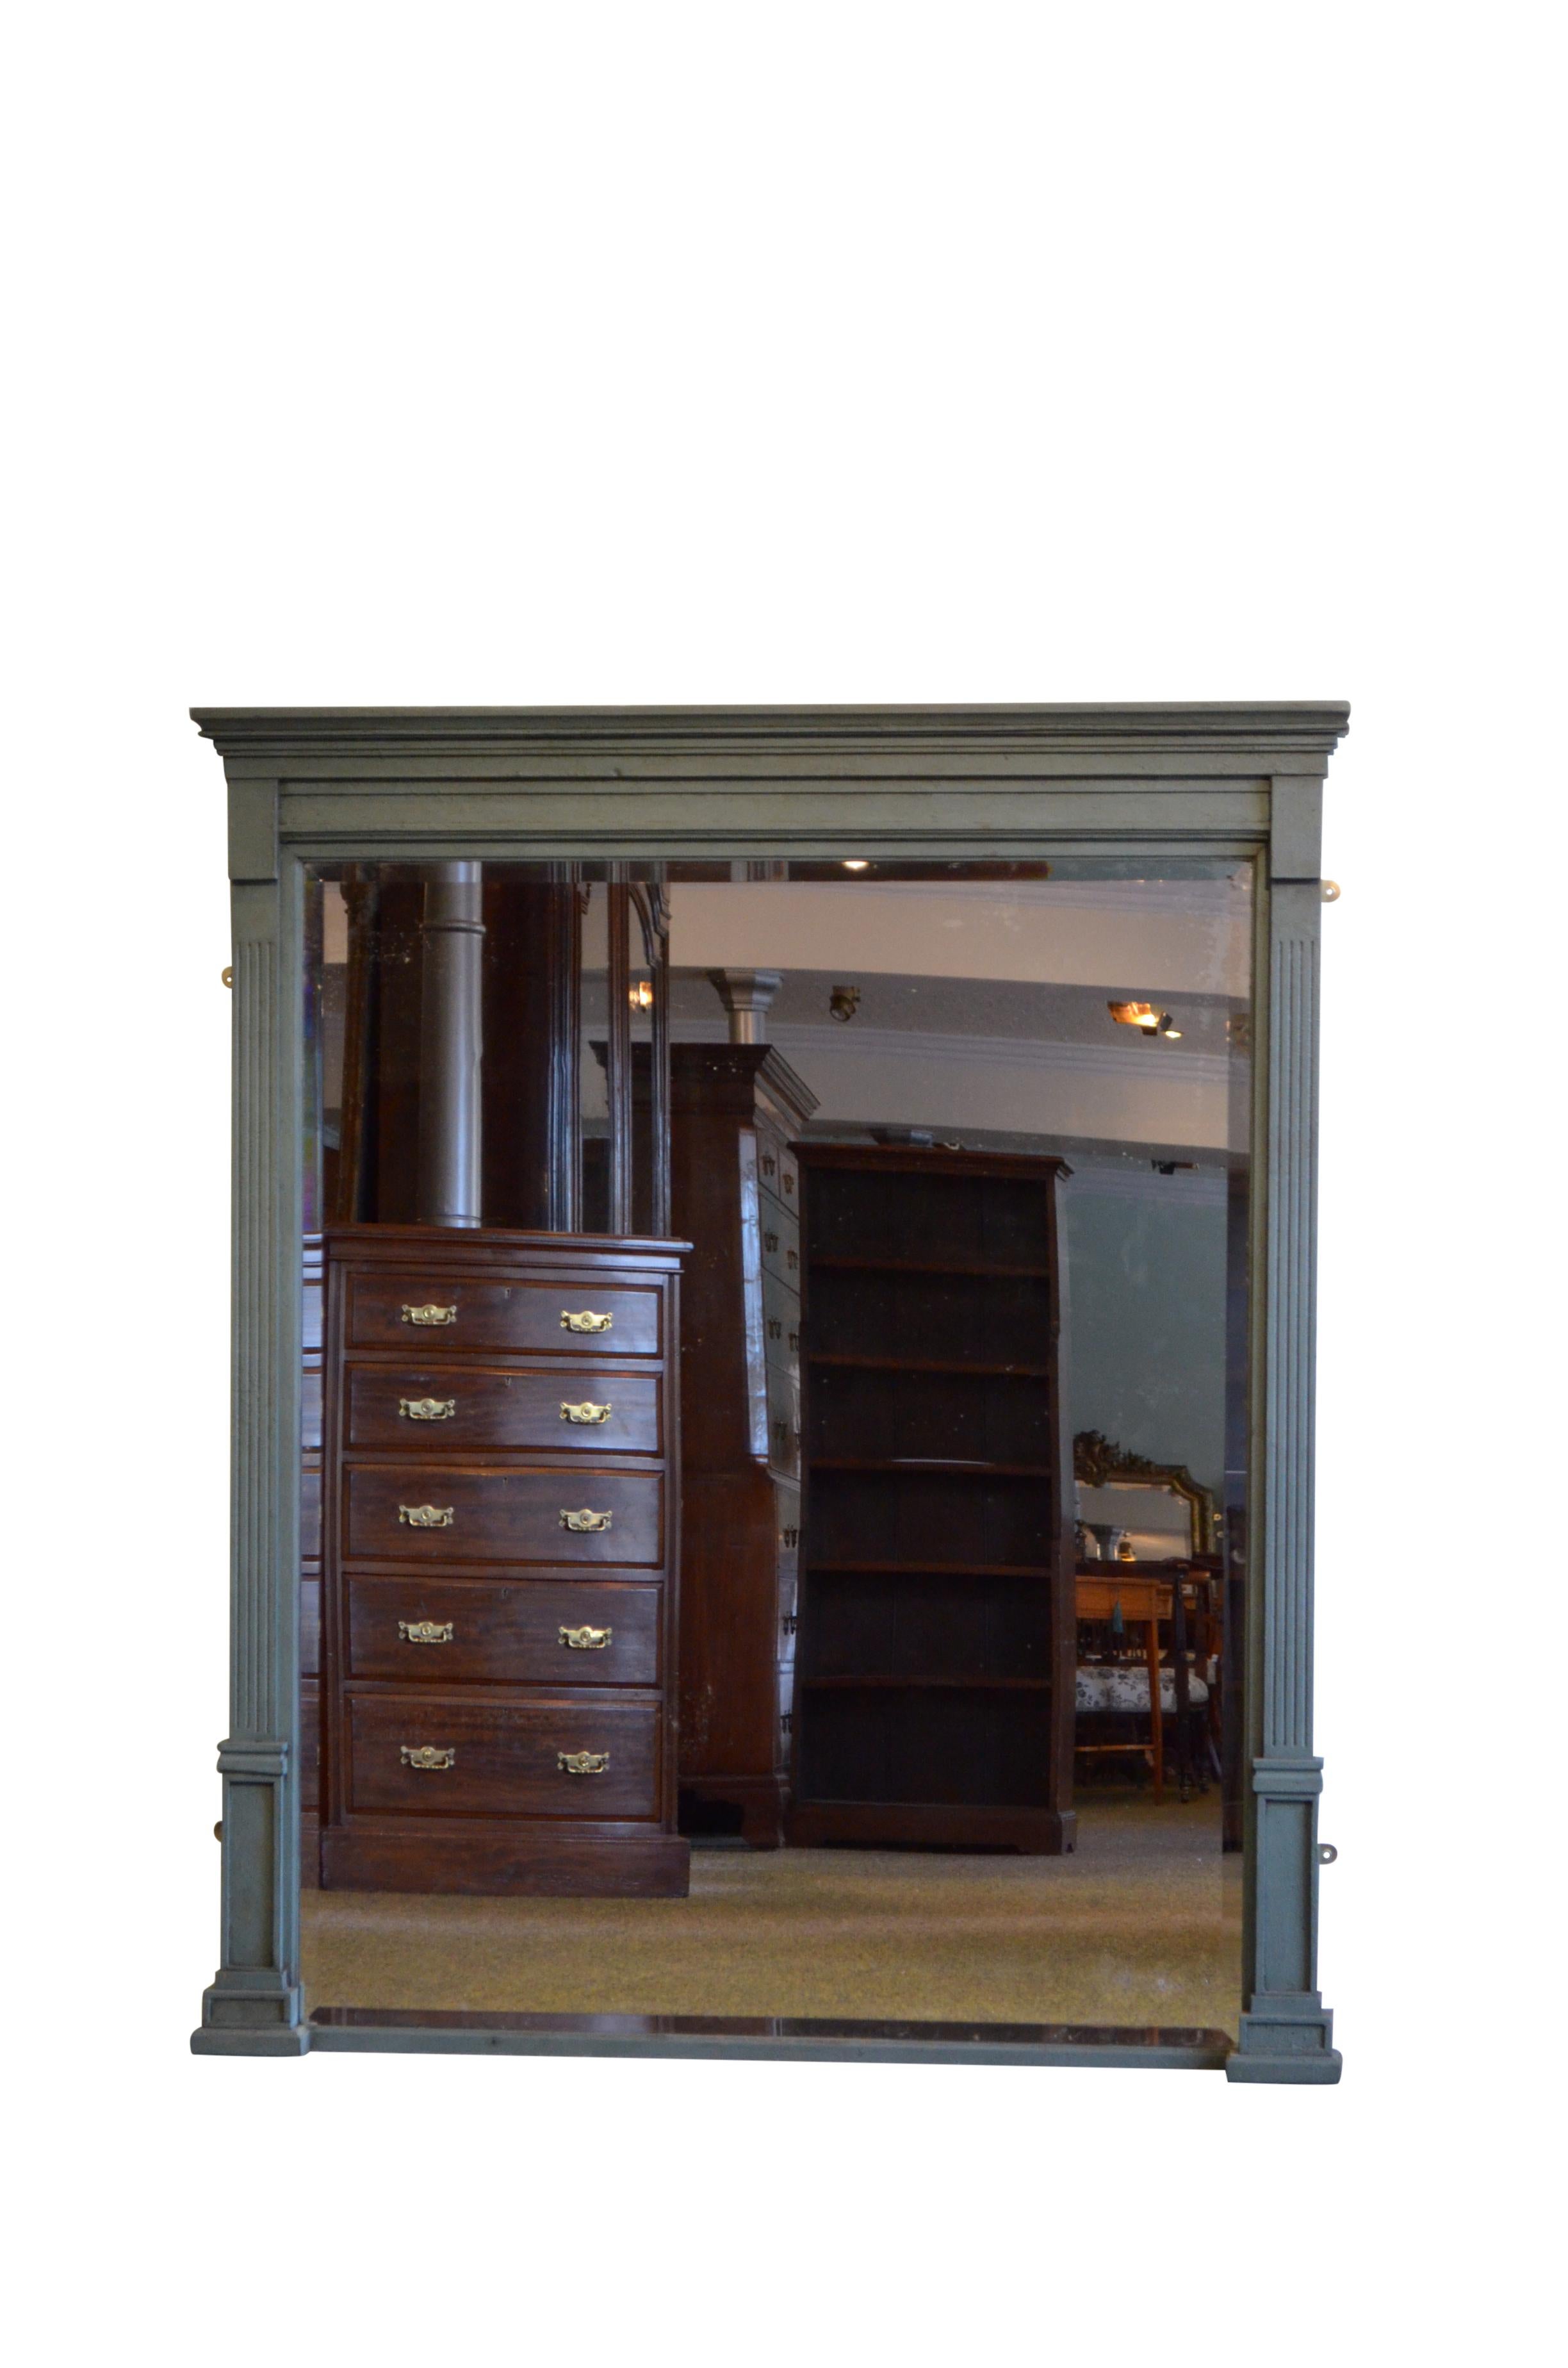 0594  Late Victorian wall mirror with original bevelled edge glass with minor imperfections in blue/ grey painted frame with reeded pilasters, panelled capitals and cavetto cornice. This antique mirror retains its original glass and original